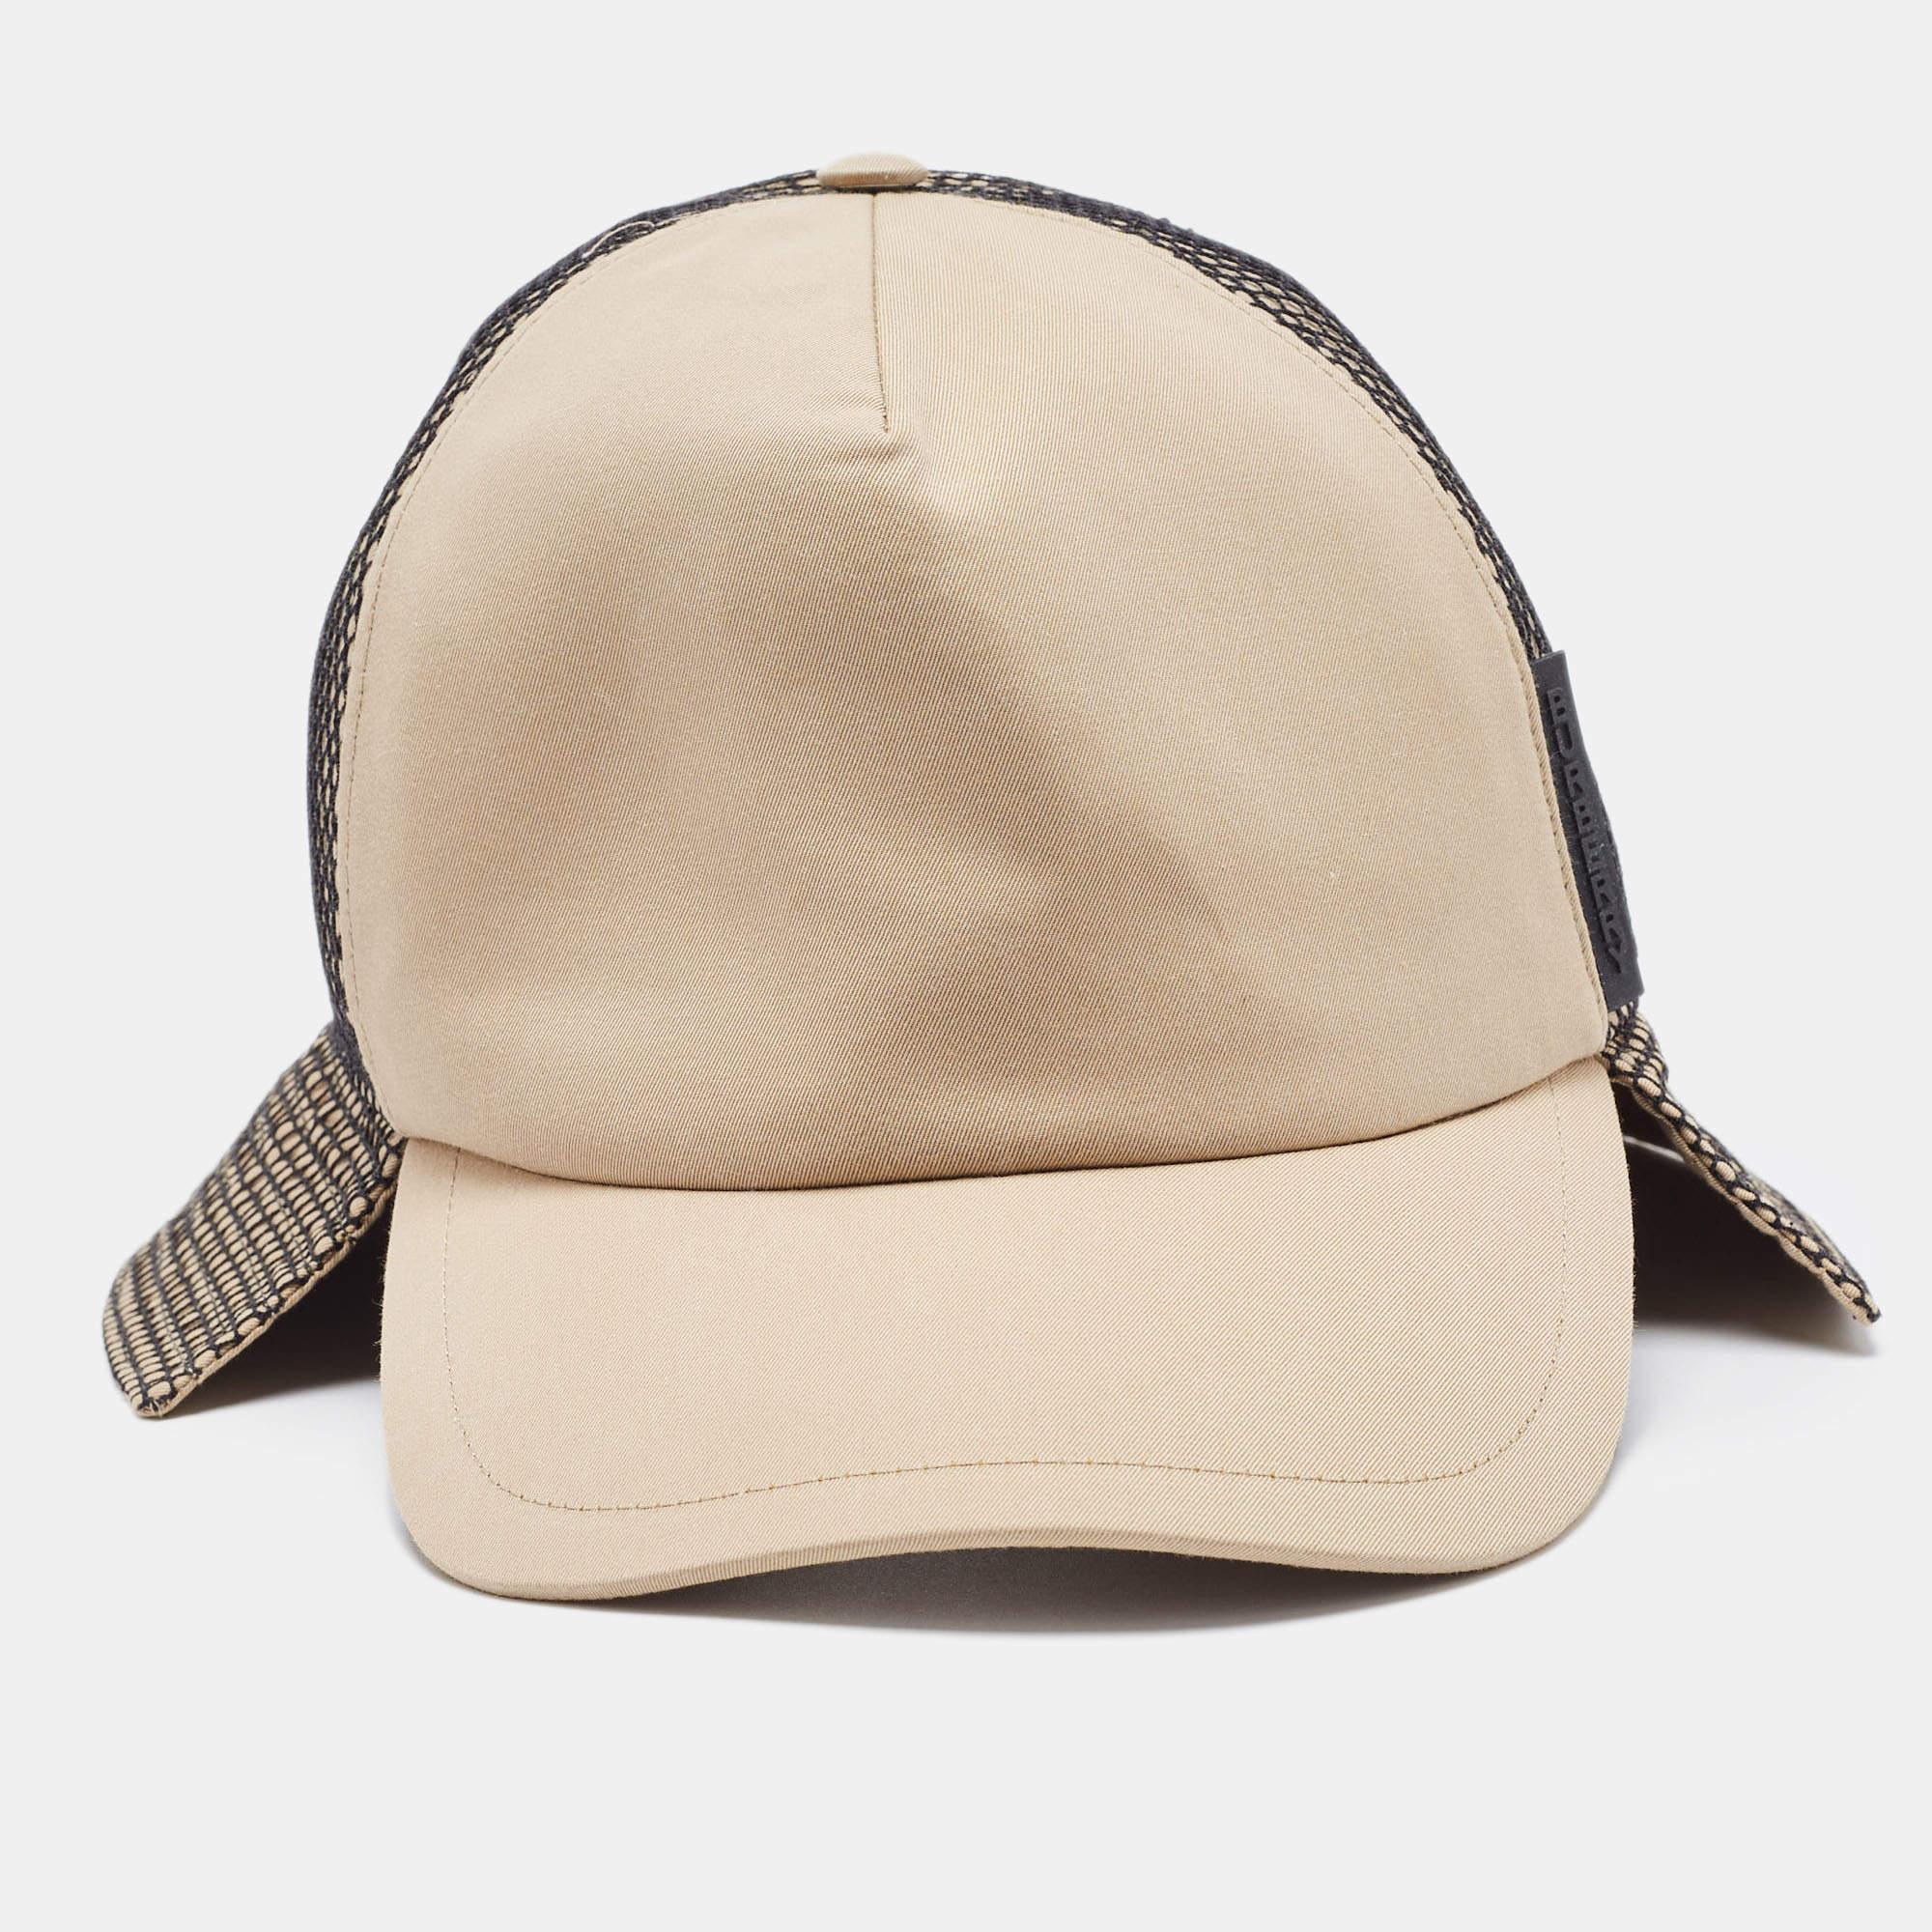 Sewn using fine materials, this Burberry baseball cap is a chic accessory. It has a luxe look and a comfortable fit.

Measurements: Circumference: 58 cm; Brim: 7 cm

Includes:  Brand Tag